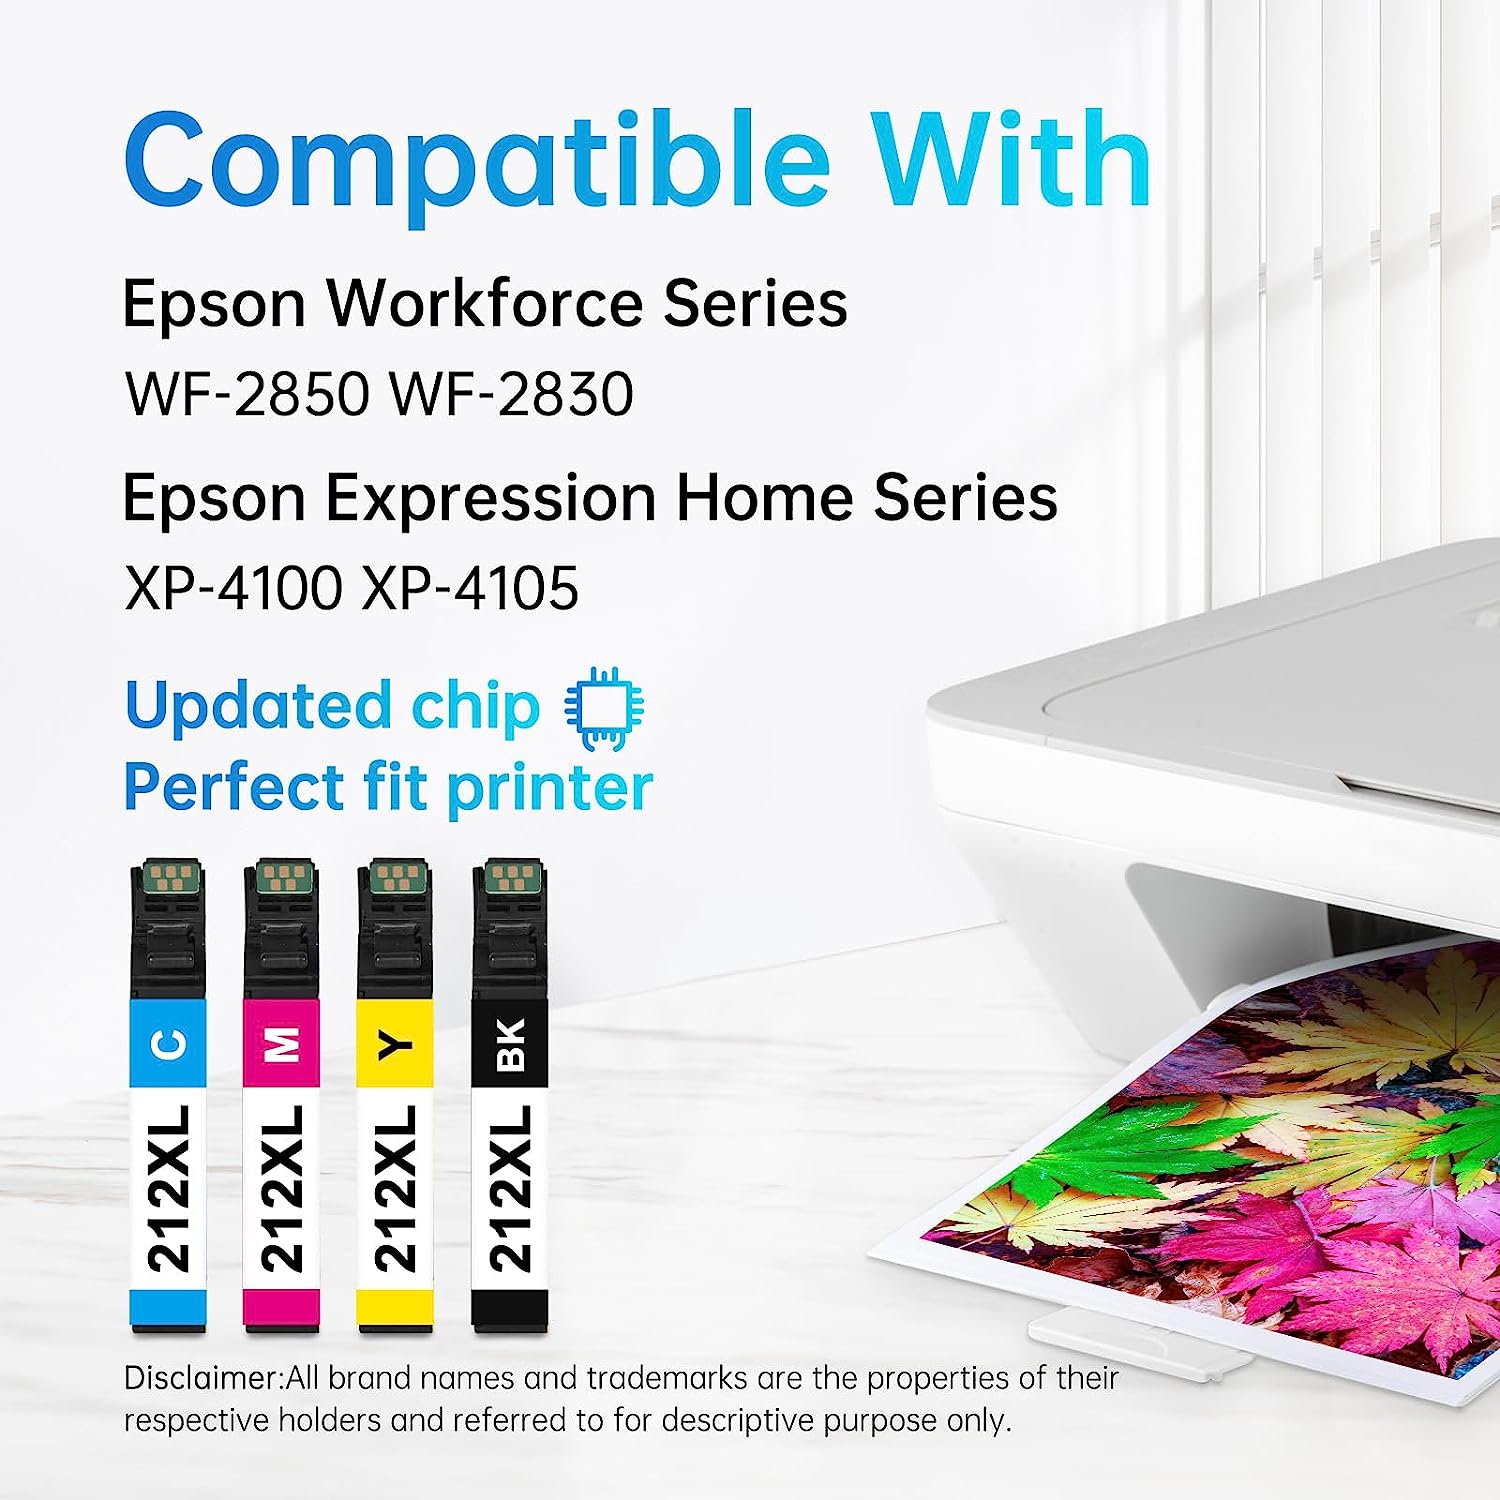 compatibility for 212XL cartridges: "LEMERO 212XL ink cartridges compatible with Epson Workforce and Expression Home printers, featuring updated chips for a perfect fit."